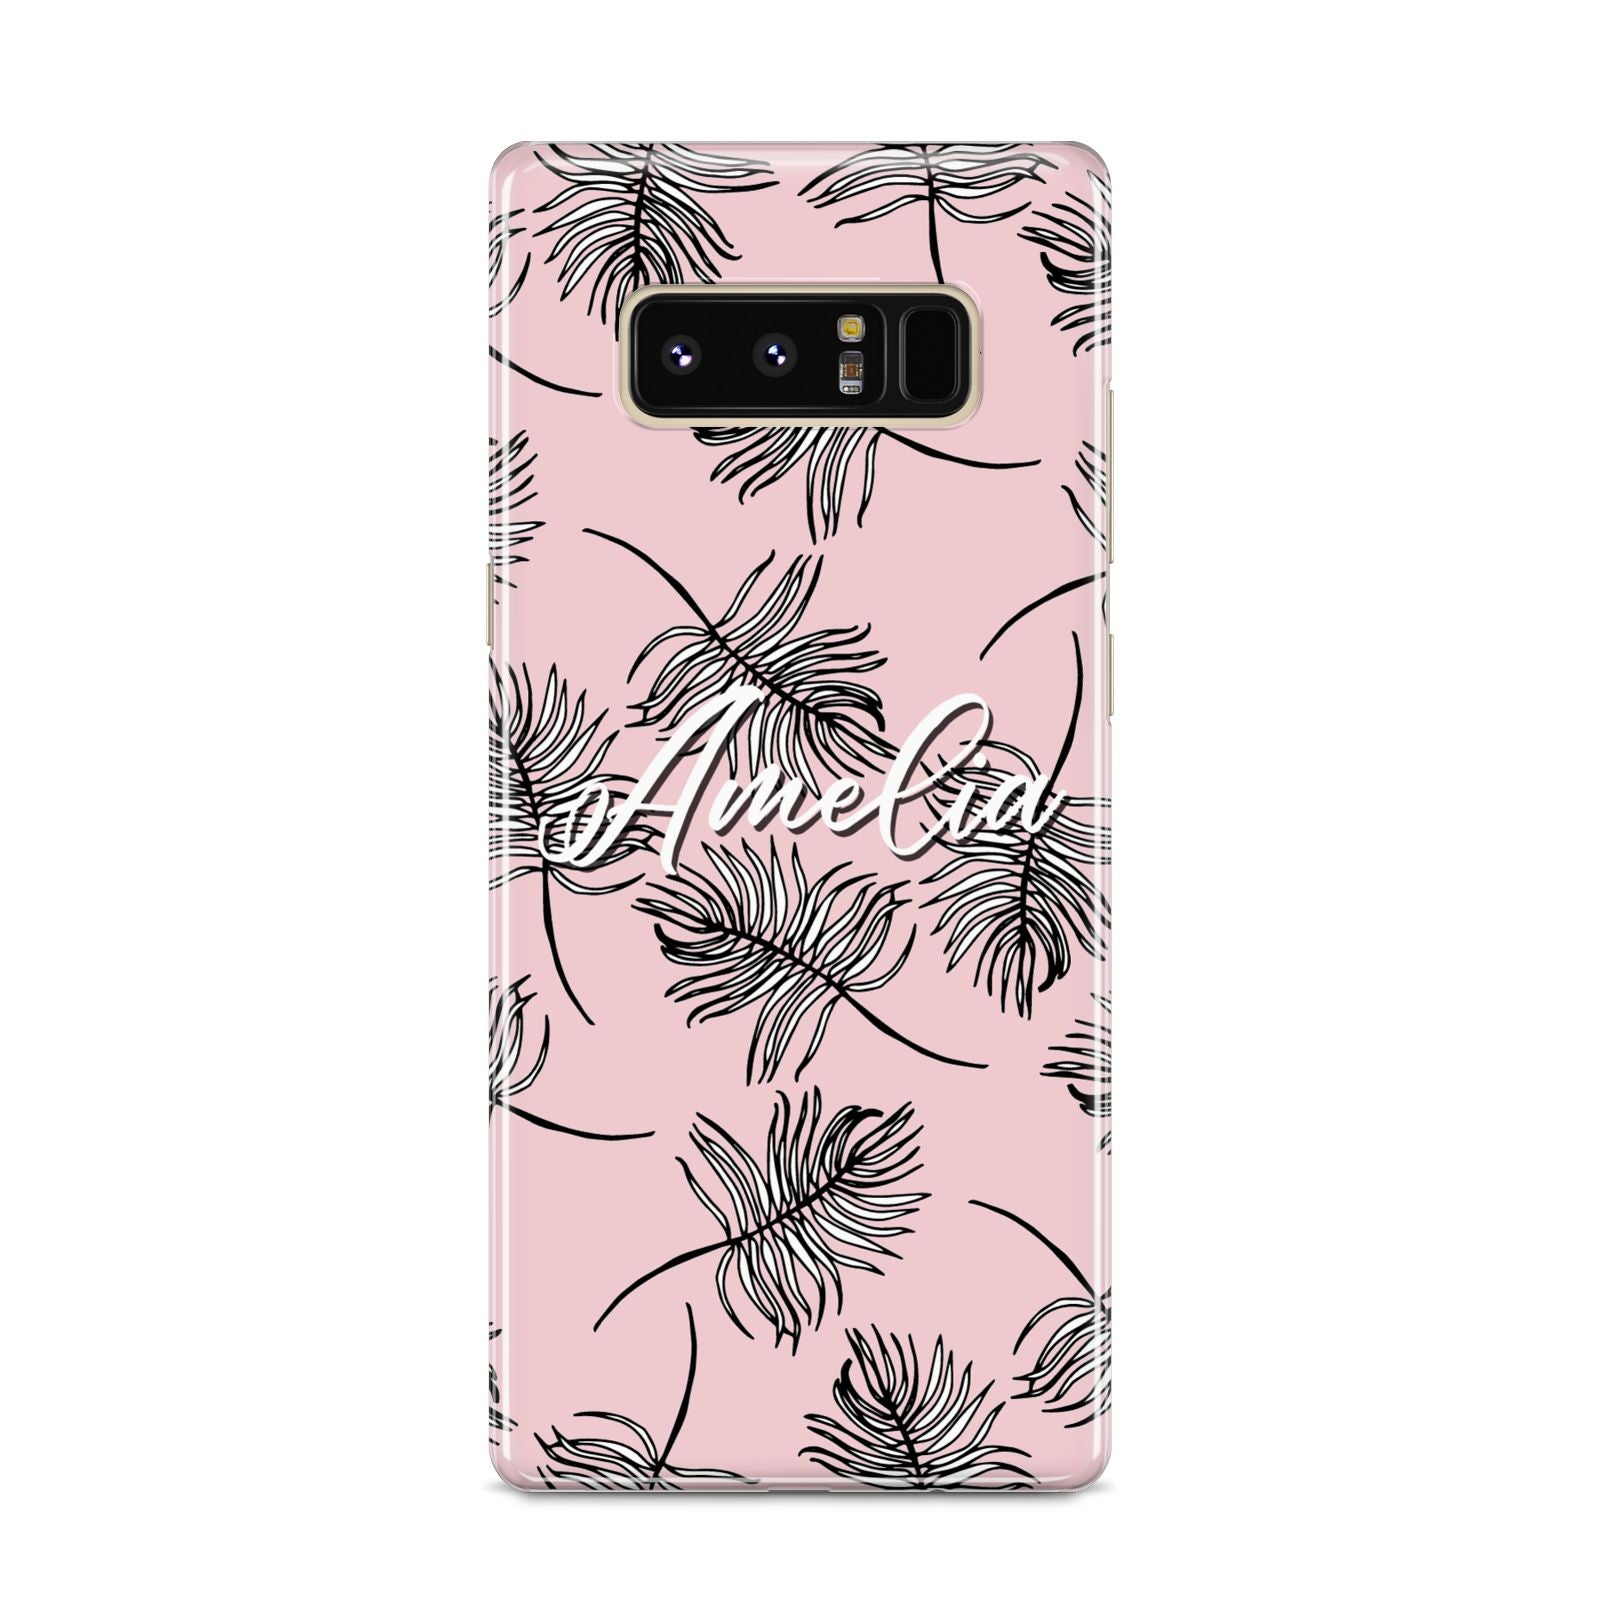 Personalised Pink Monochrome Tropical Leaf Samsung Galaxy S8 Case